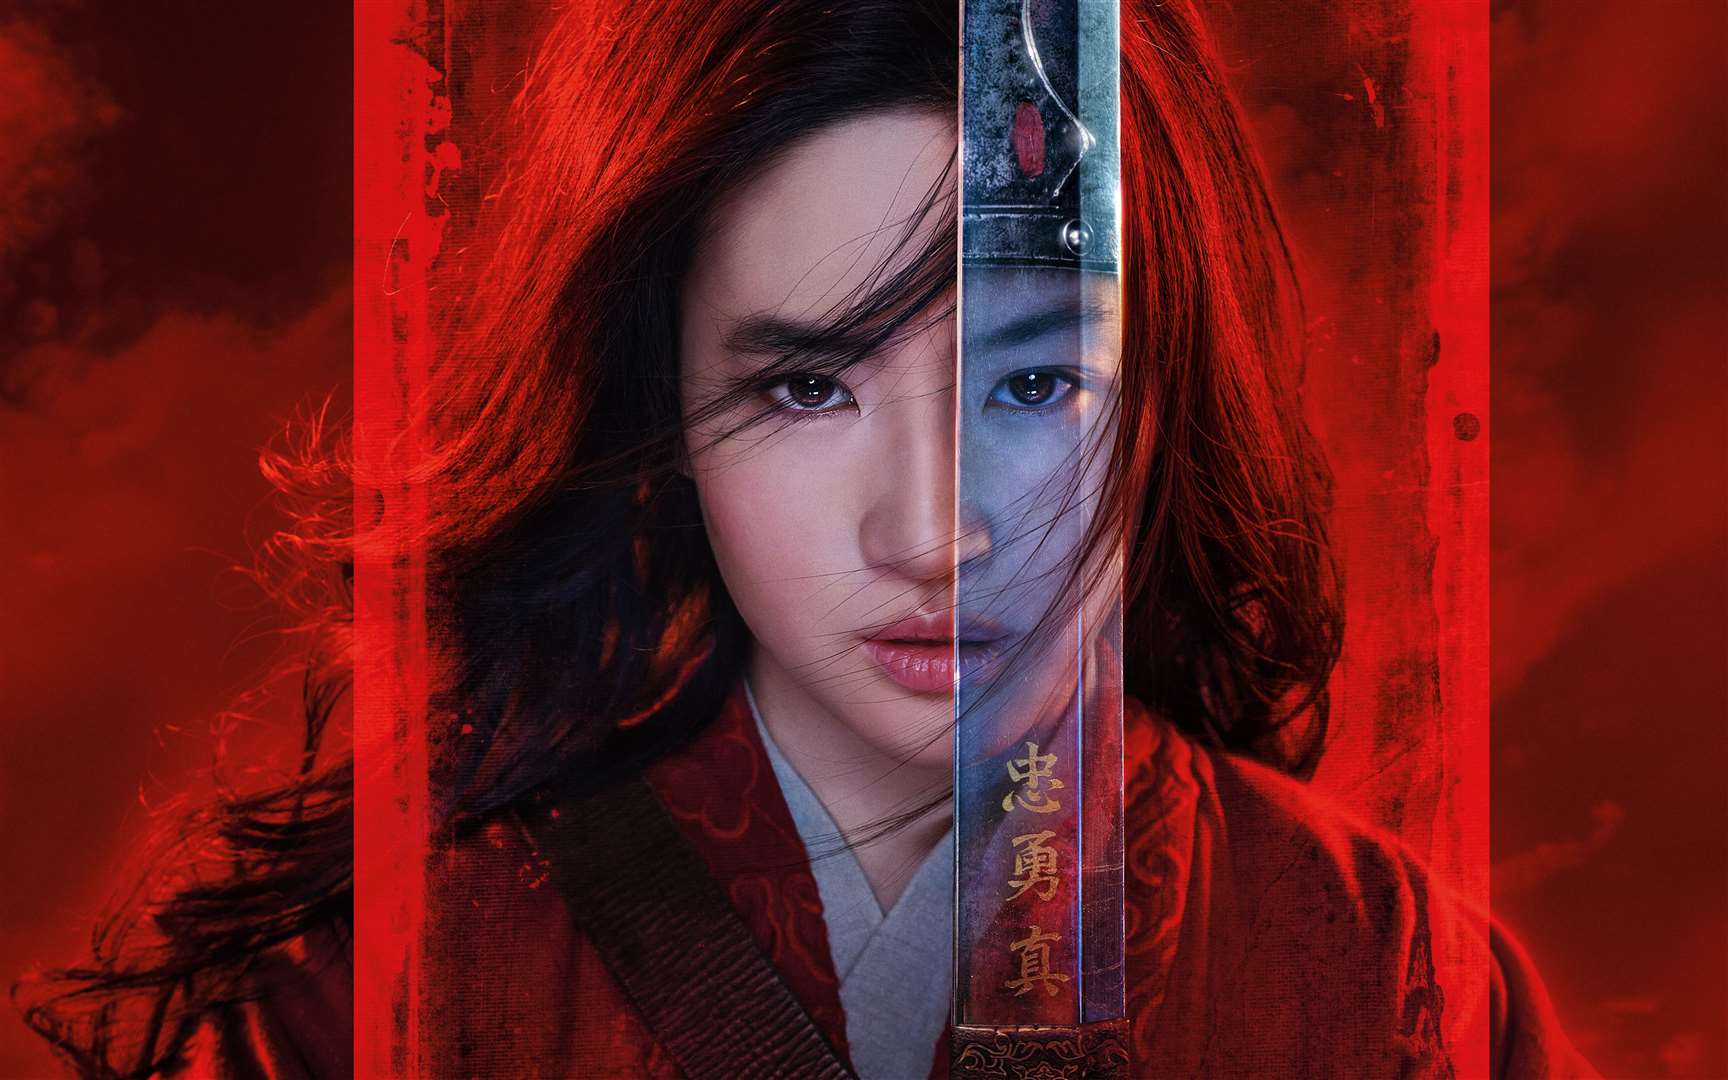 Mulan is now set to be released at the end of July